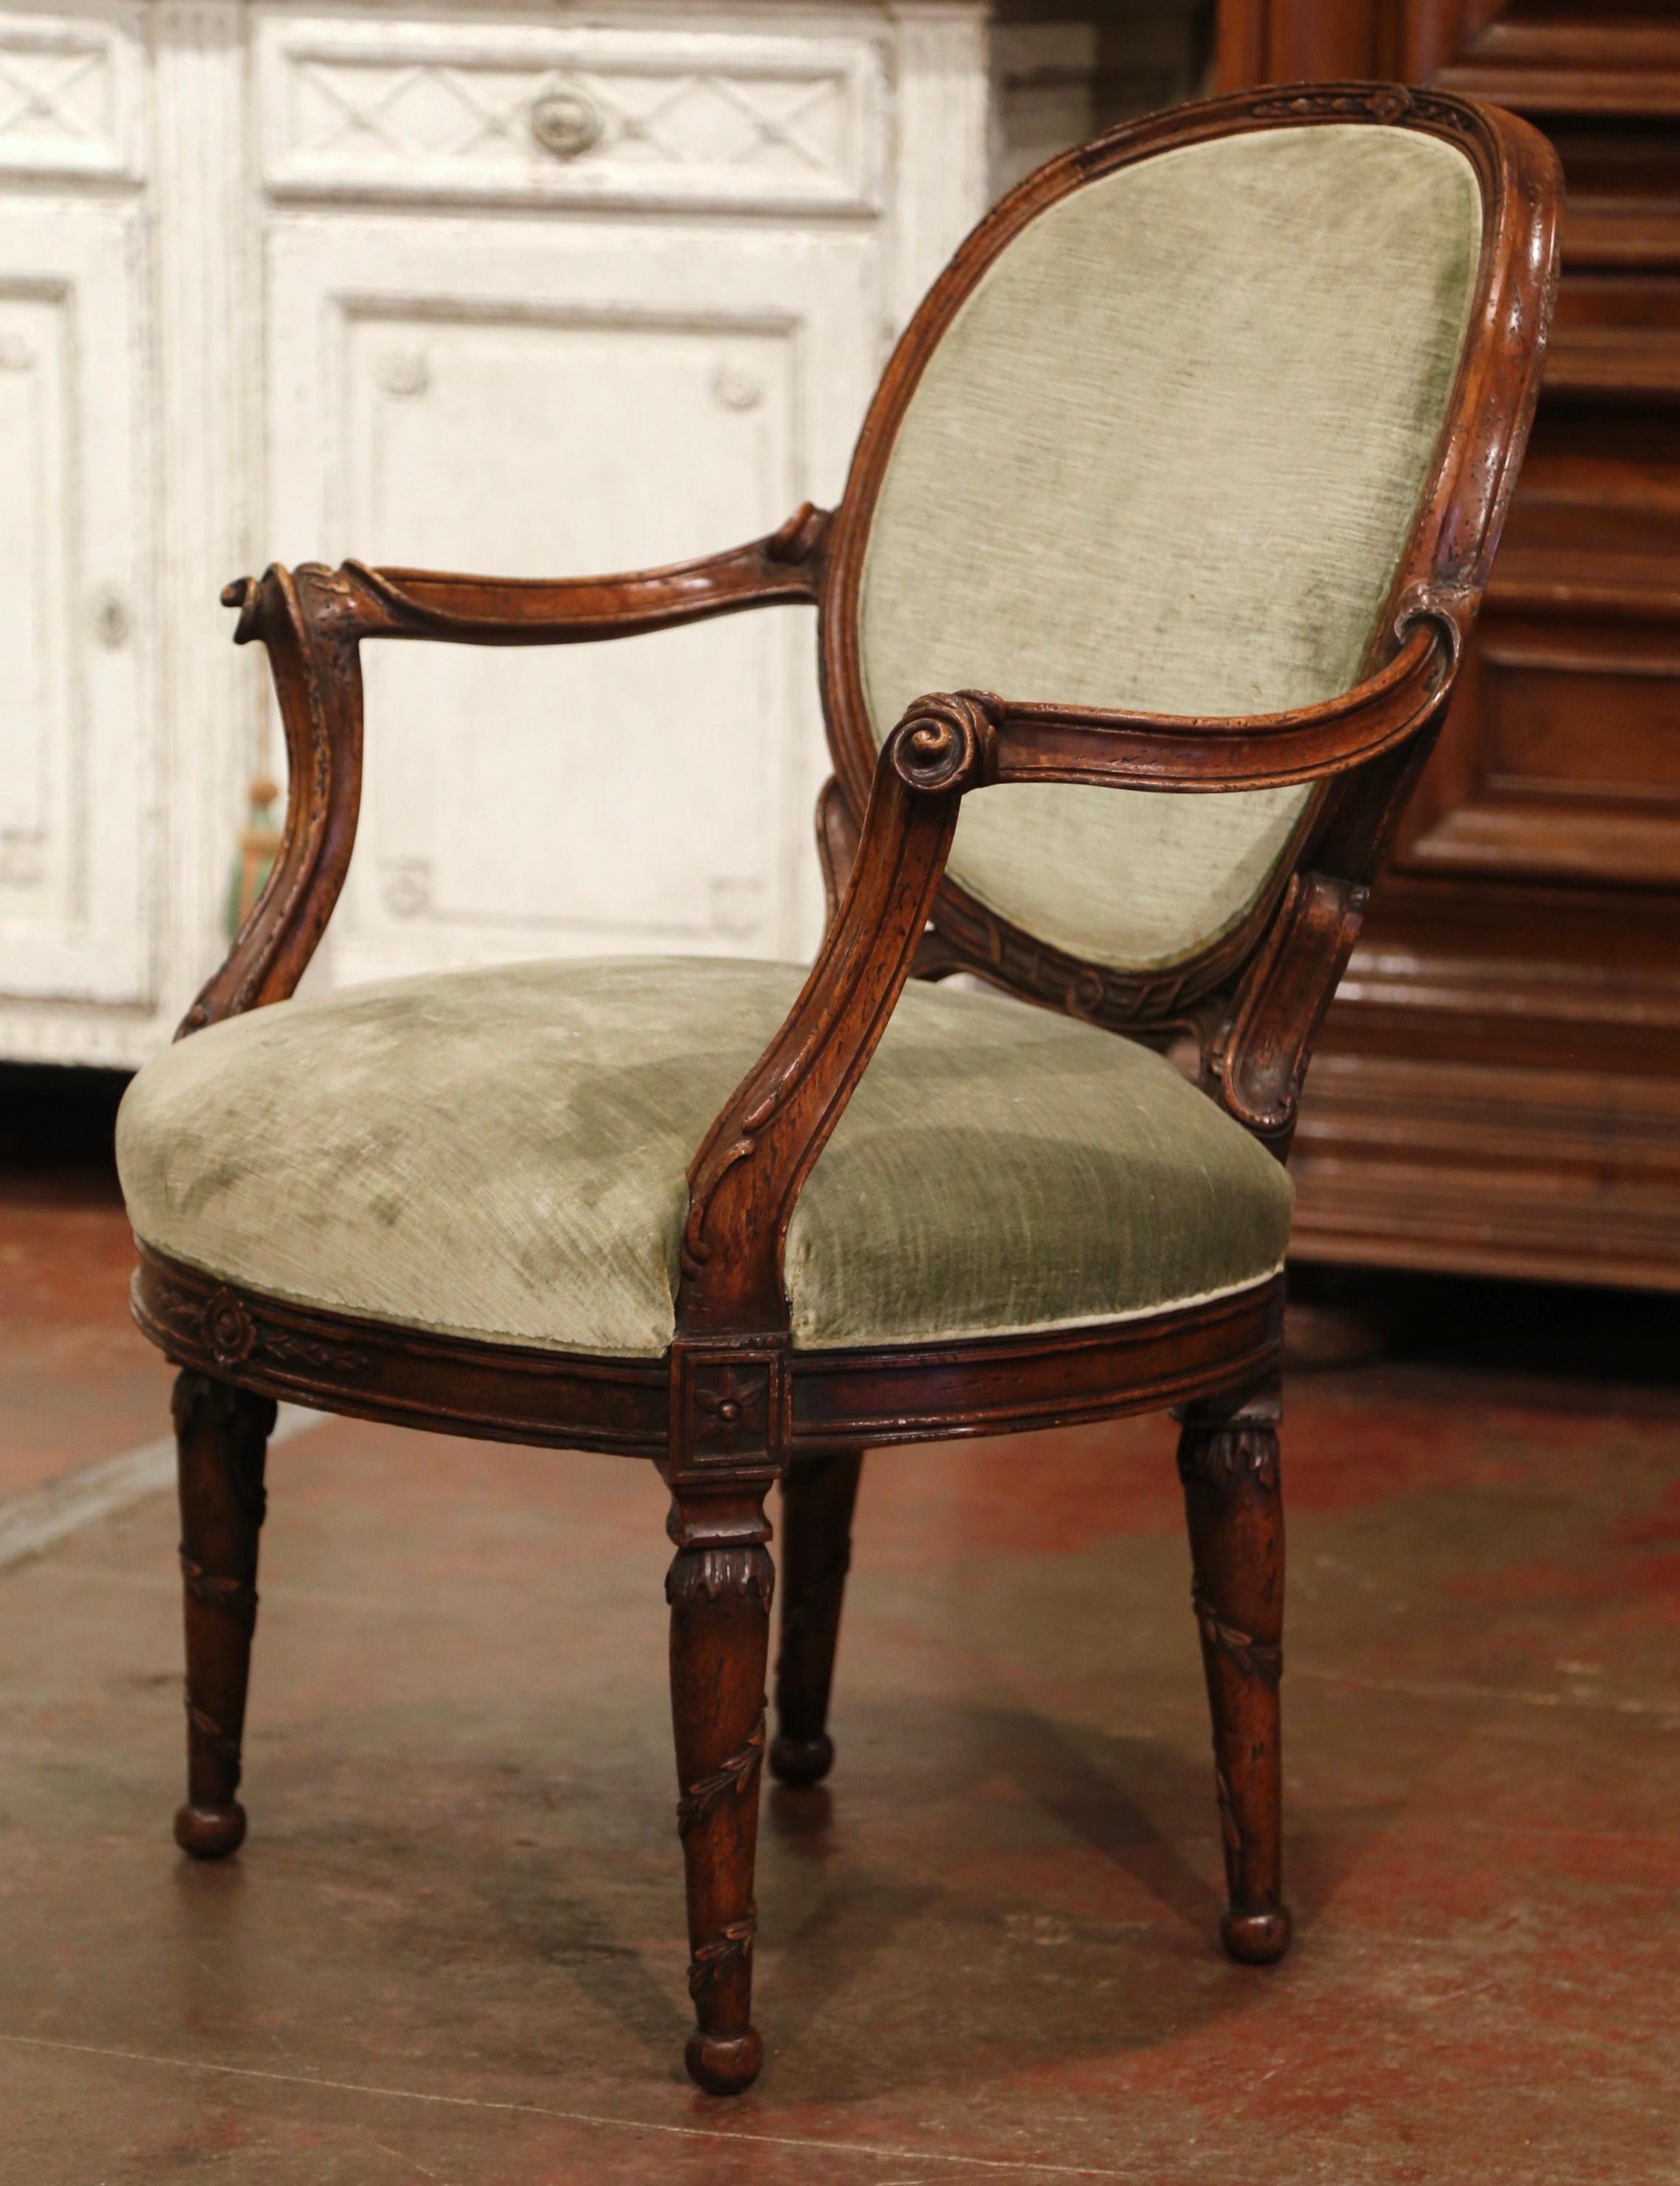 Adorn your living room, bedroom, or office with this beautifully carved antique armchair. Crafted in France circa 1880, the fruitwood chair stands on tapered and turned legs decorated with twisted leaf motifs around the legs and embellished with